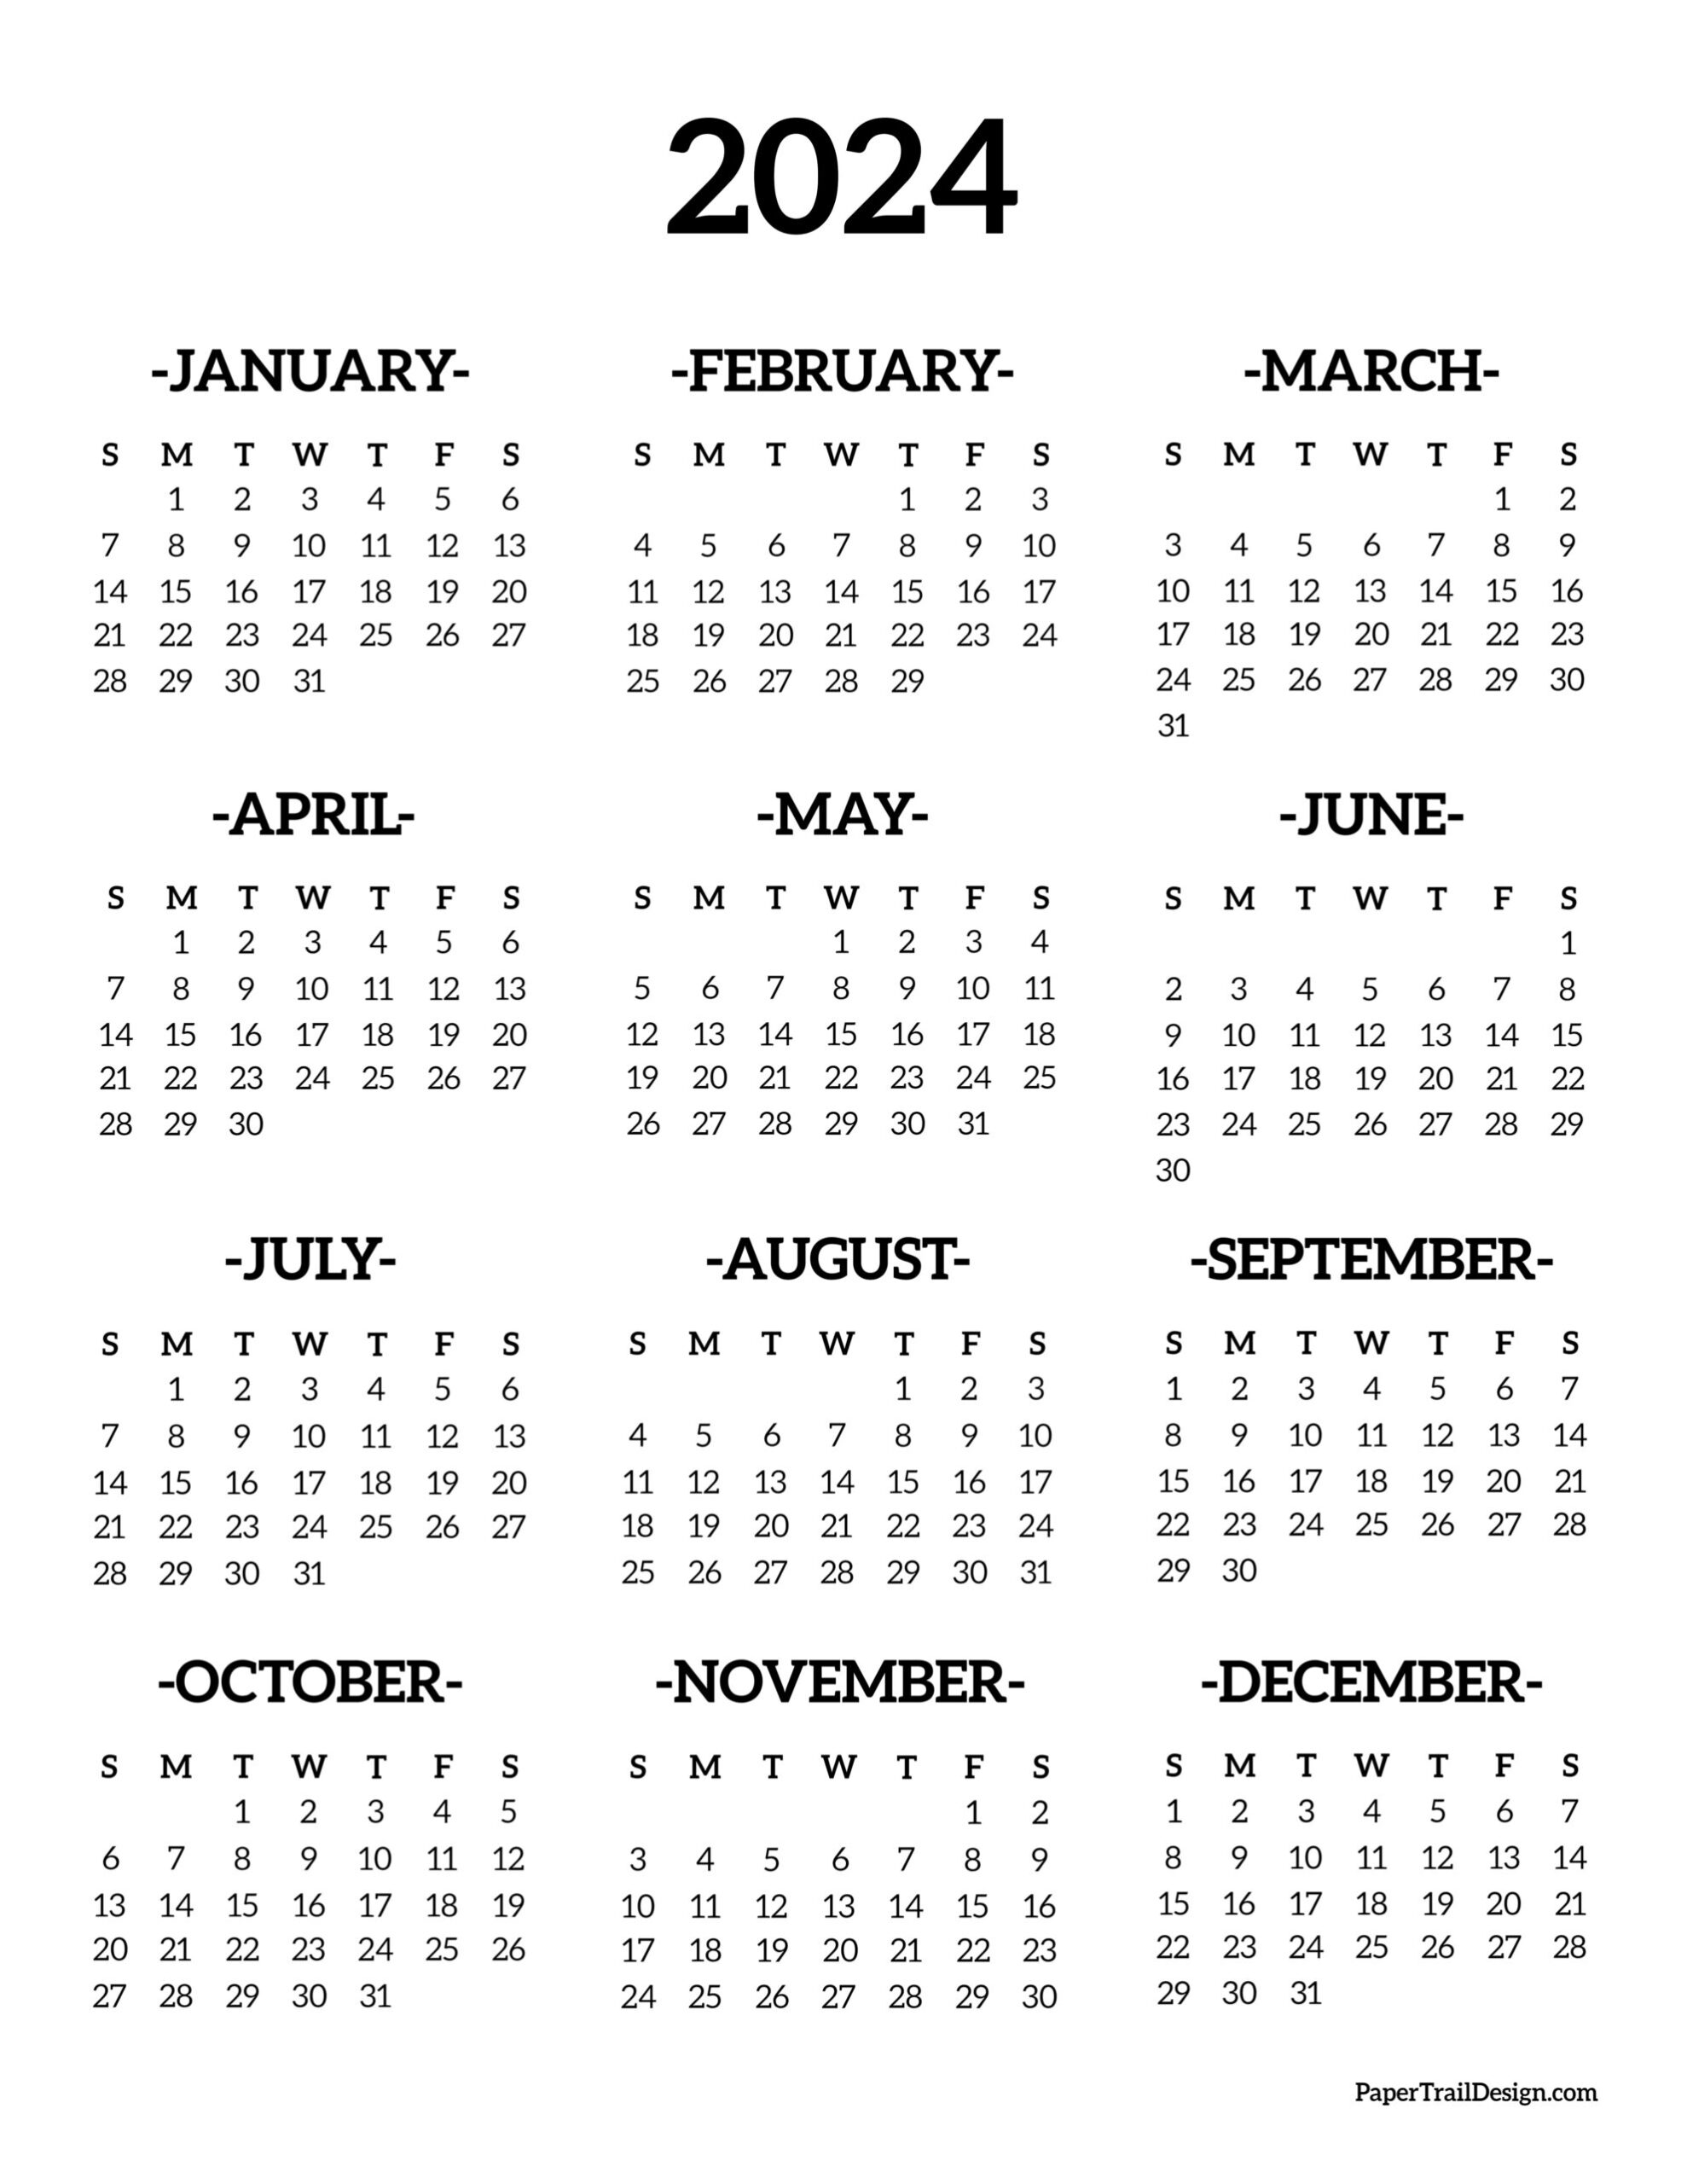 Calendar 2024 Printable One Page - Paper Trail Design for 2024 Year Calendar Free Printable